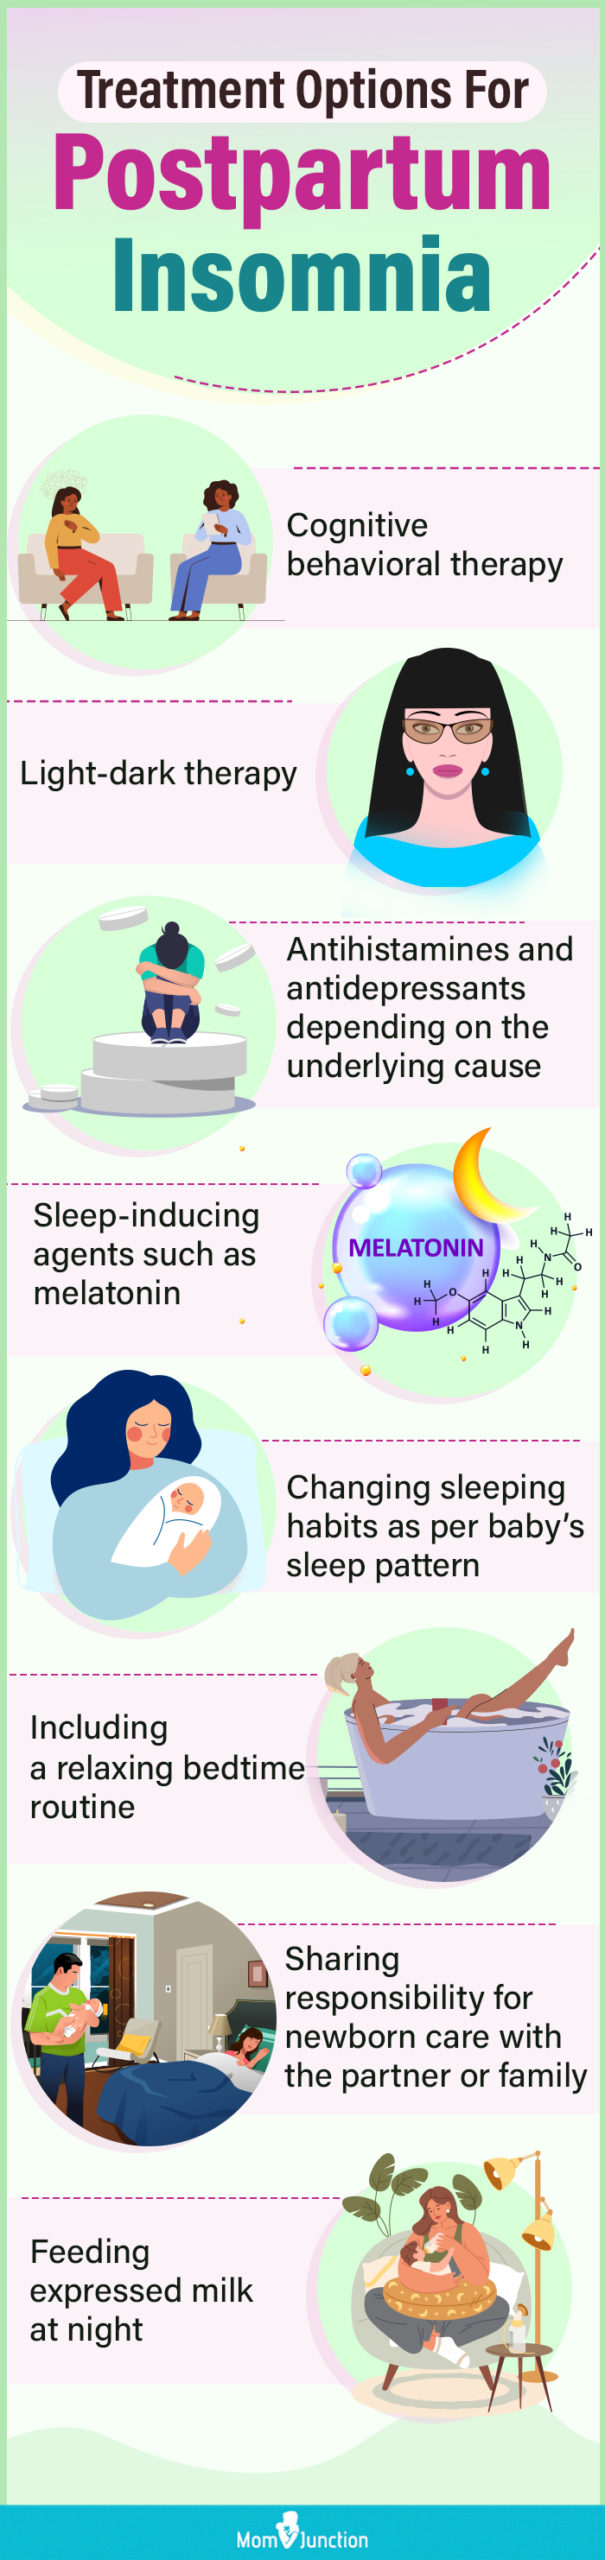 treatment options for postpartum insomnia (infographic)